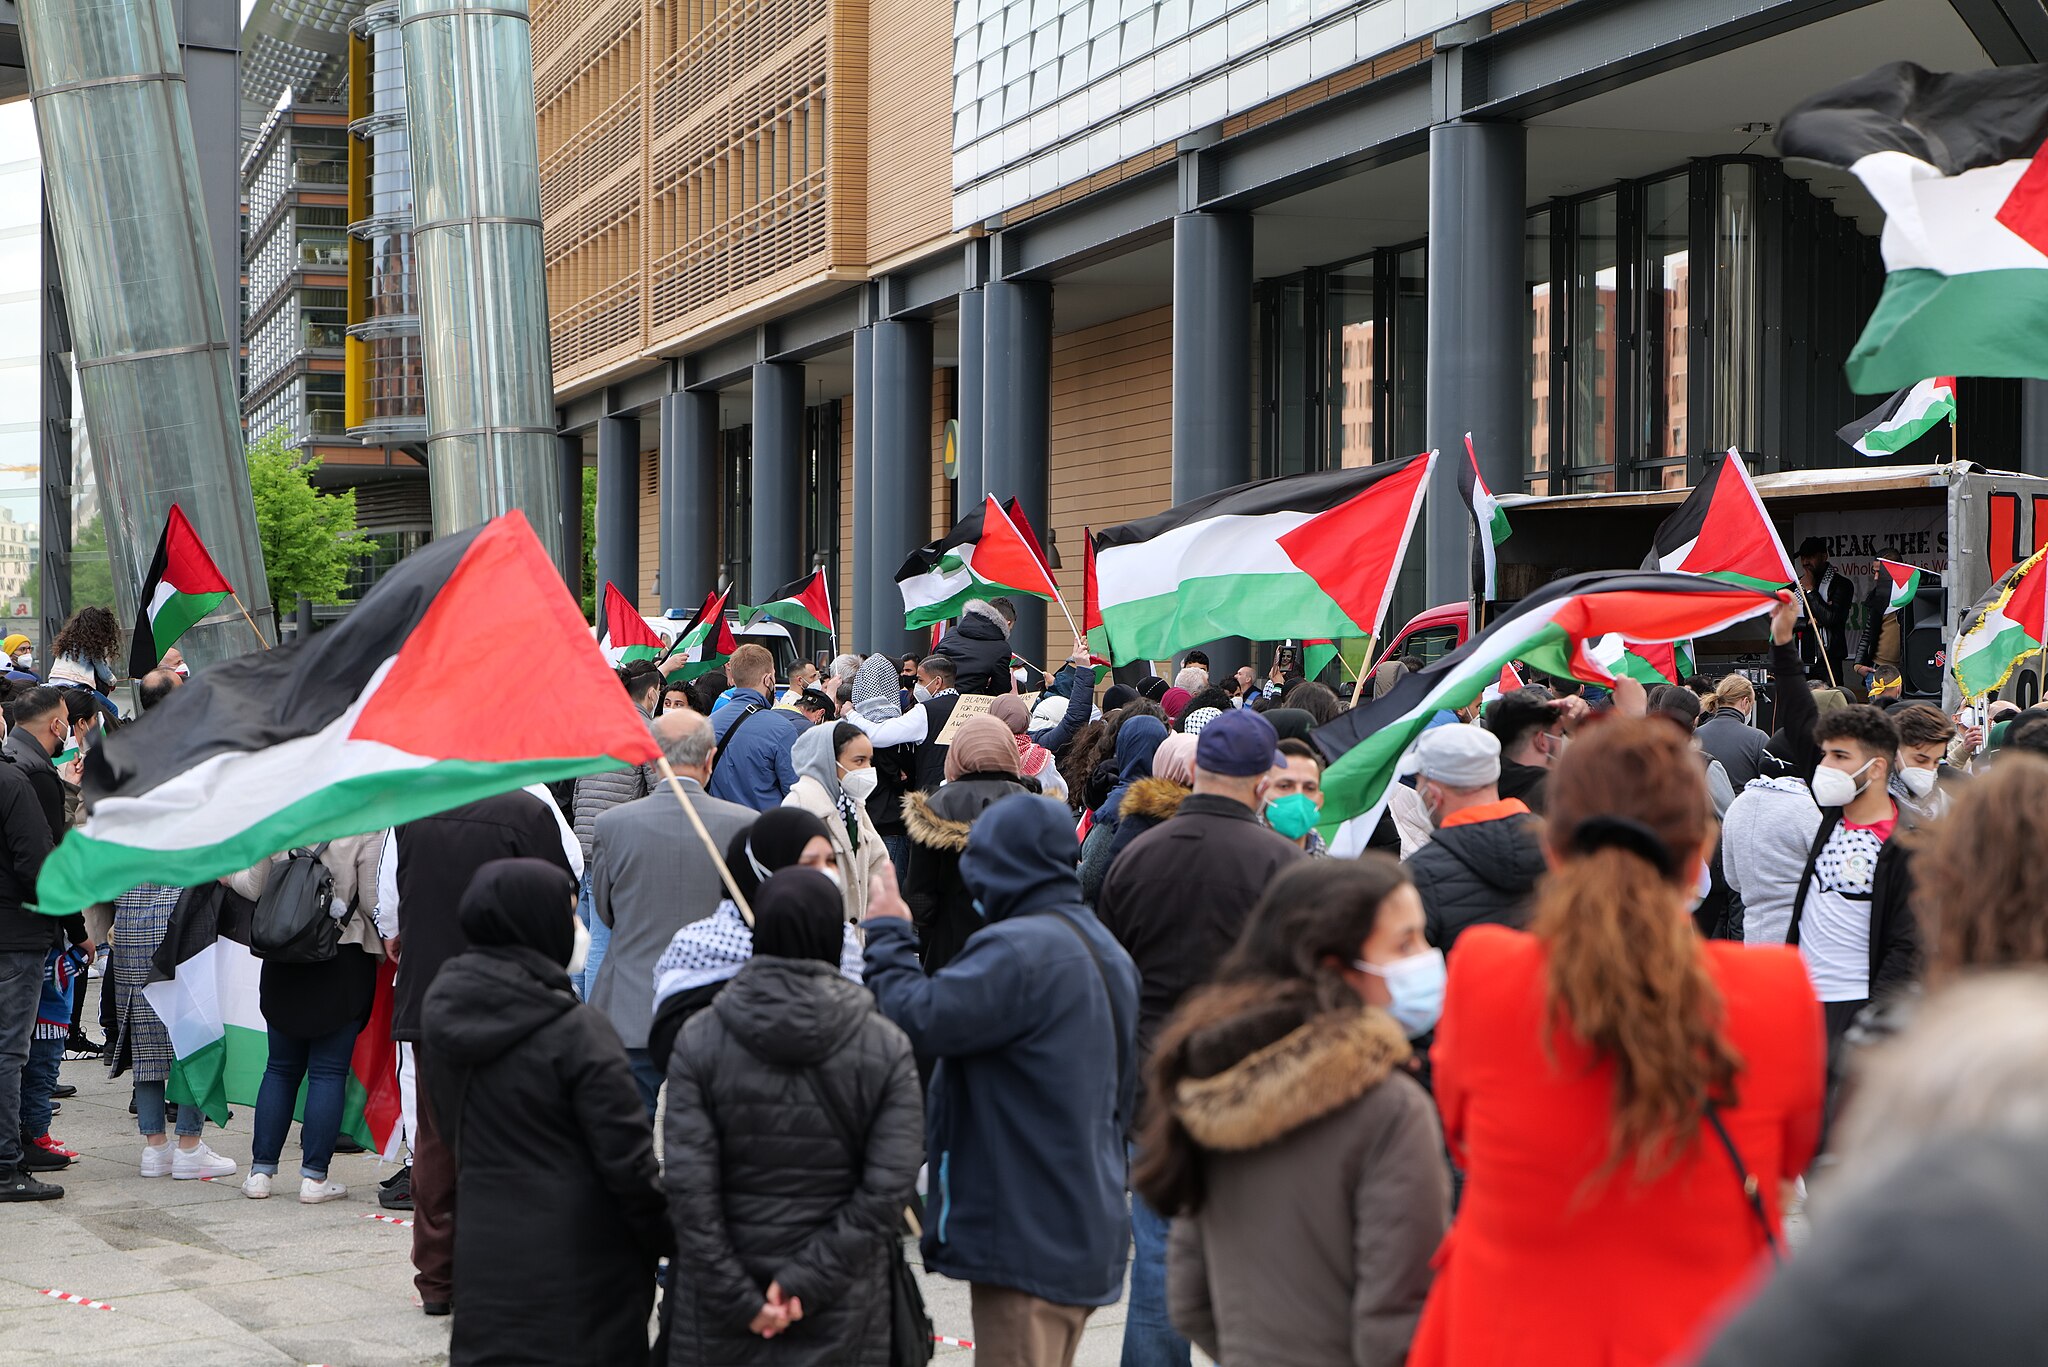 UK Metropolitan Police arrest 9 for displaying pro-Palestinian banner alleged to be antisemitic